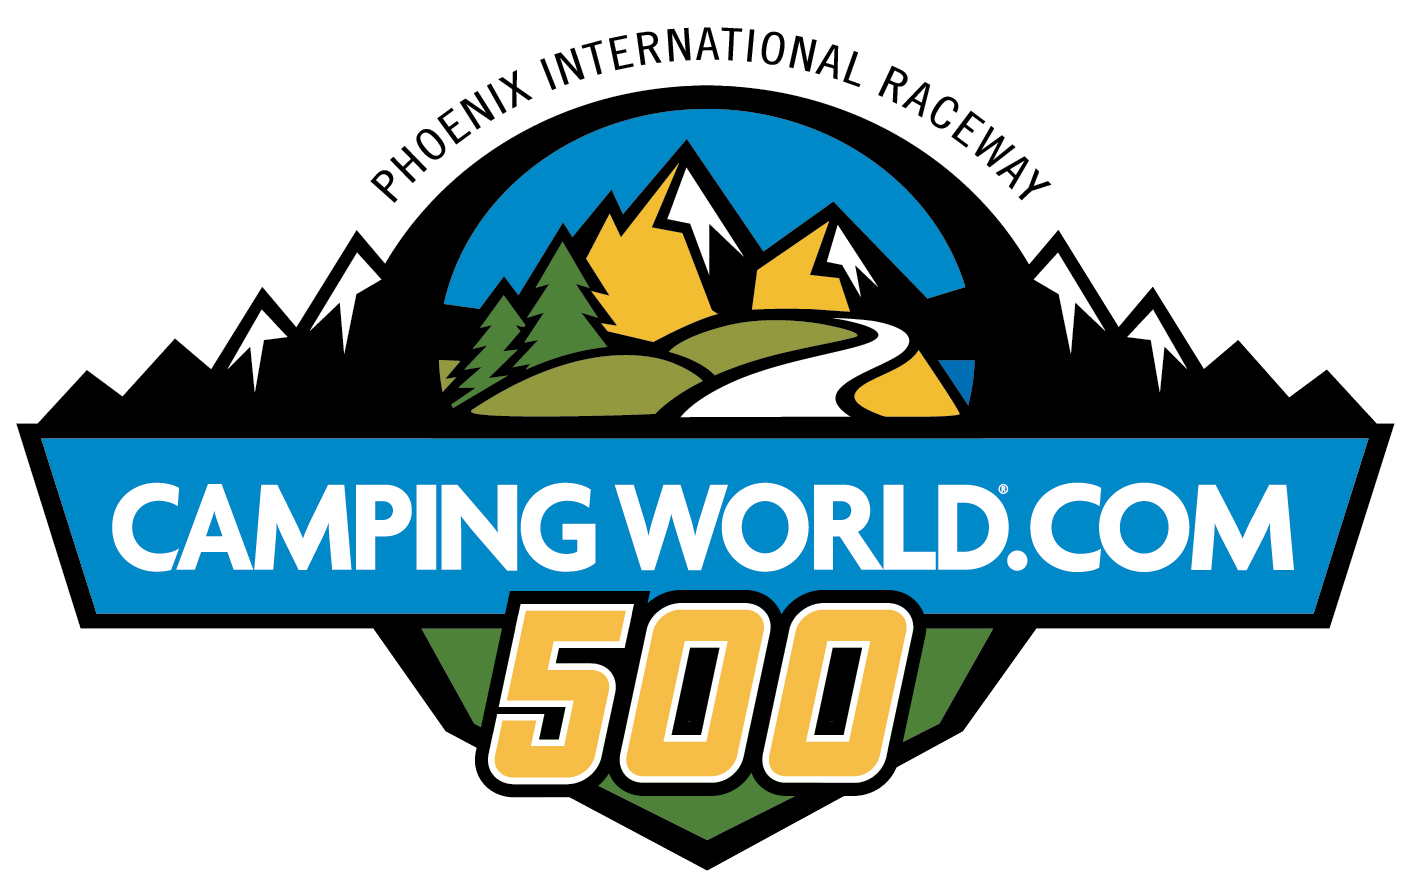 NASCAR at Phoenix: Sprint Cup Series starting lineup, green flag and tv info for Camping World 500